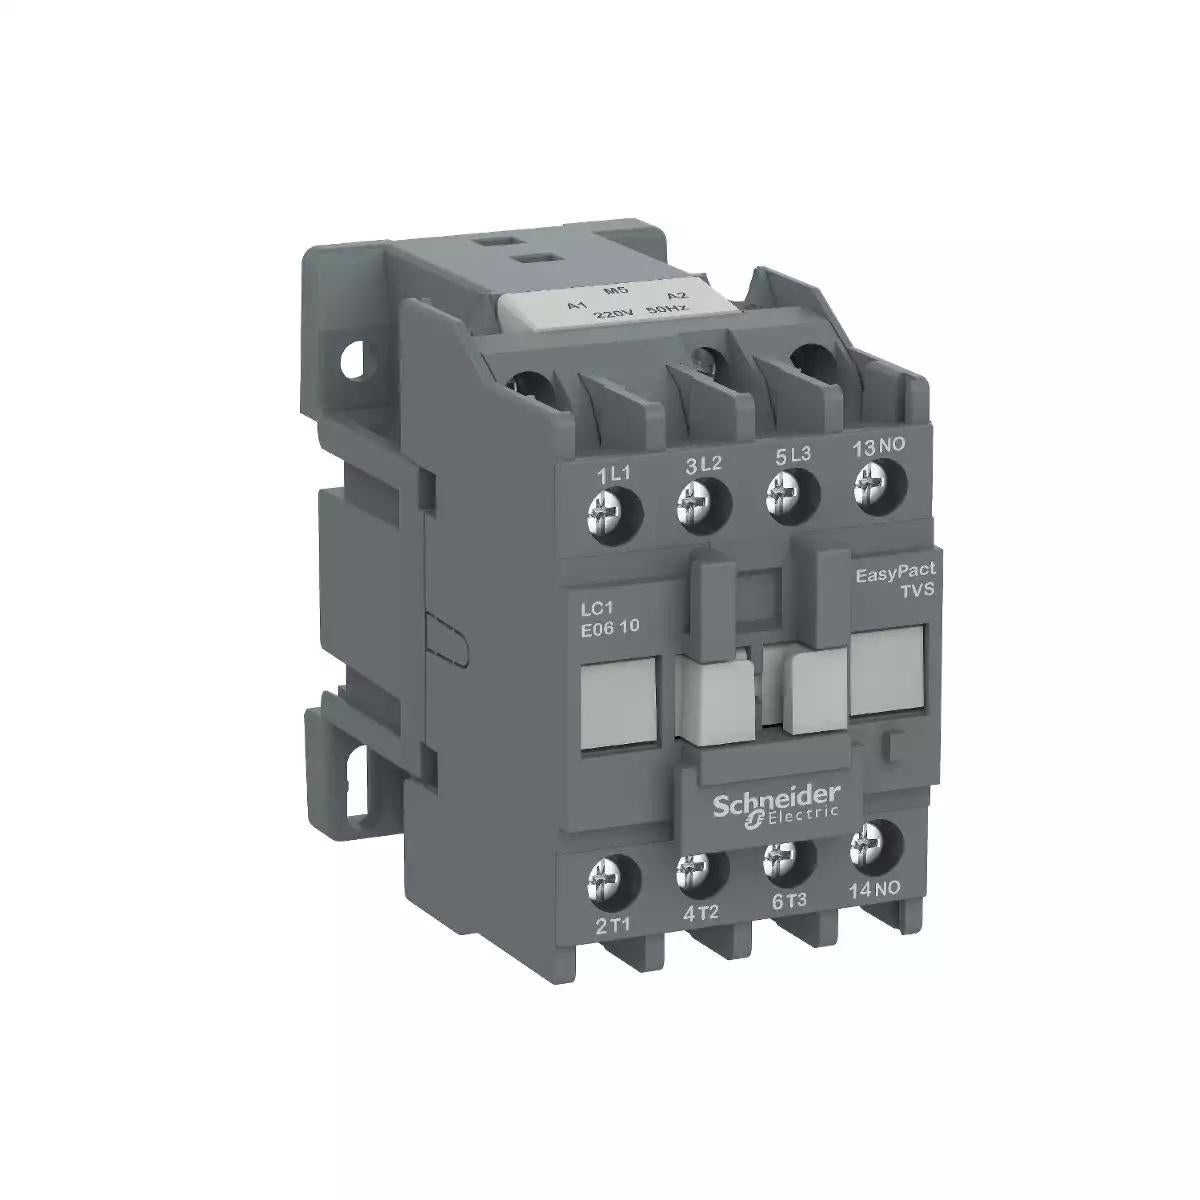 Contactor, EasyPact TVS, 3P(3NO), AC-3, <=440V, 6A, 220V AC coil, 50Hz, 1NC auxiliary contact